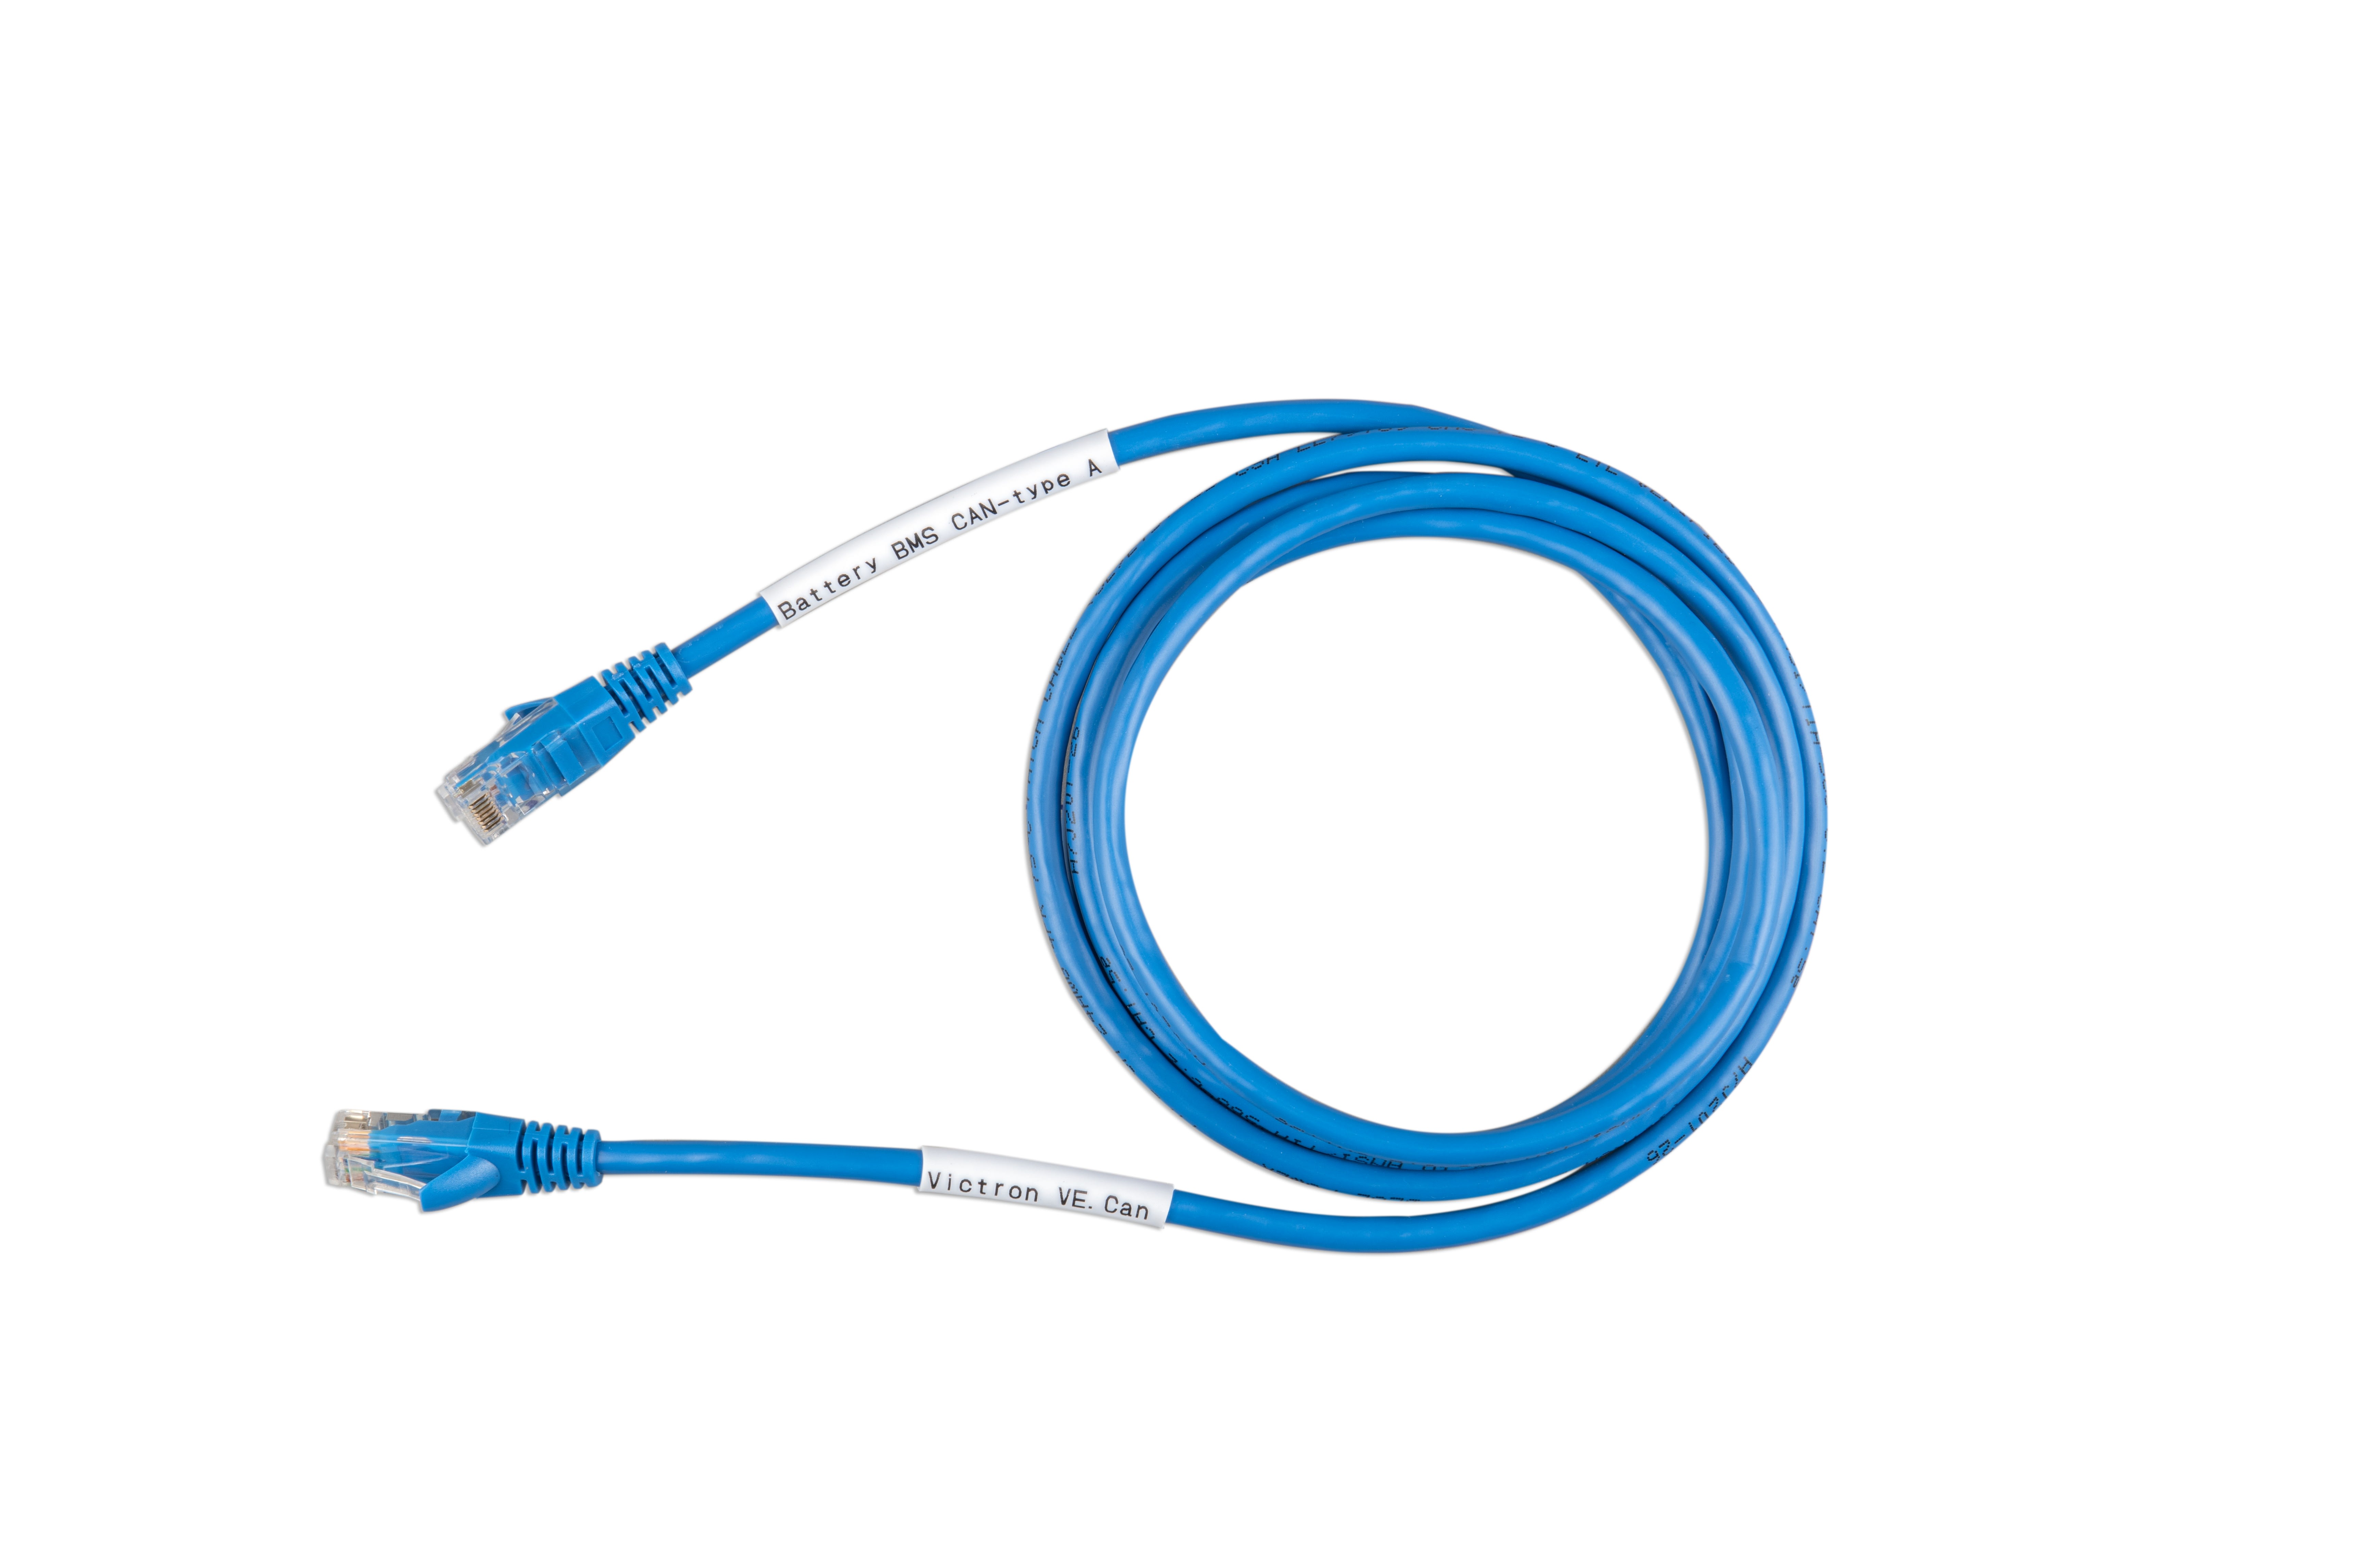 Madenr - Cable VE.Can to CAN-bus BMS type B 1.8 m